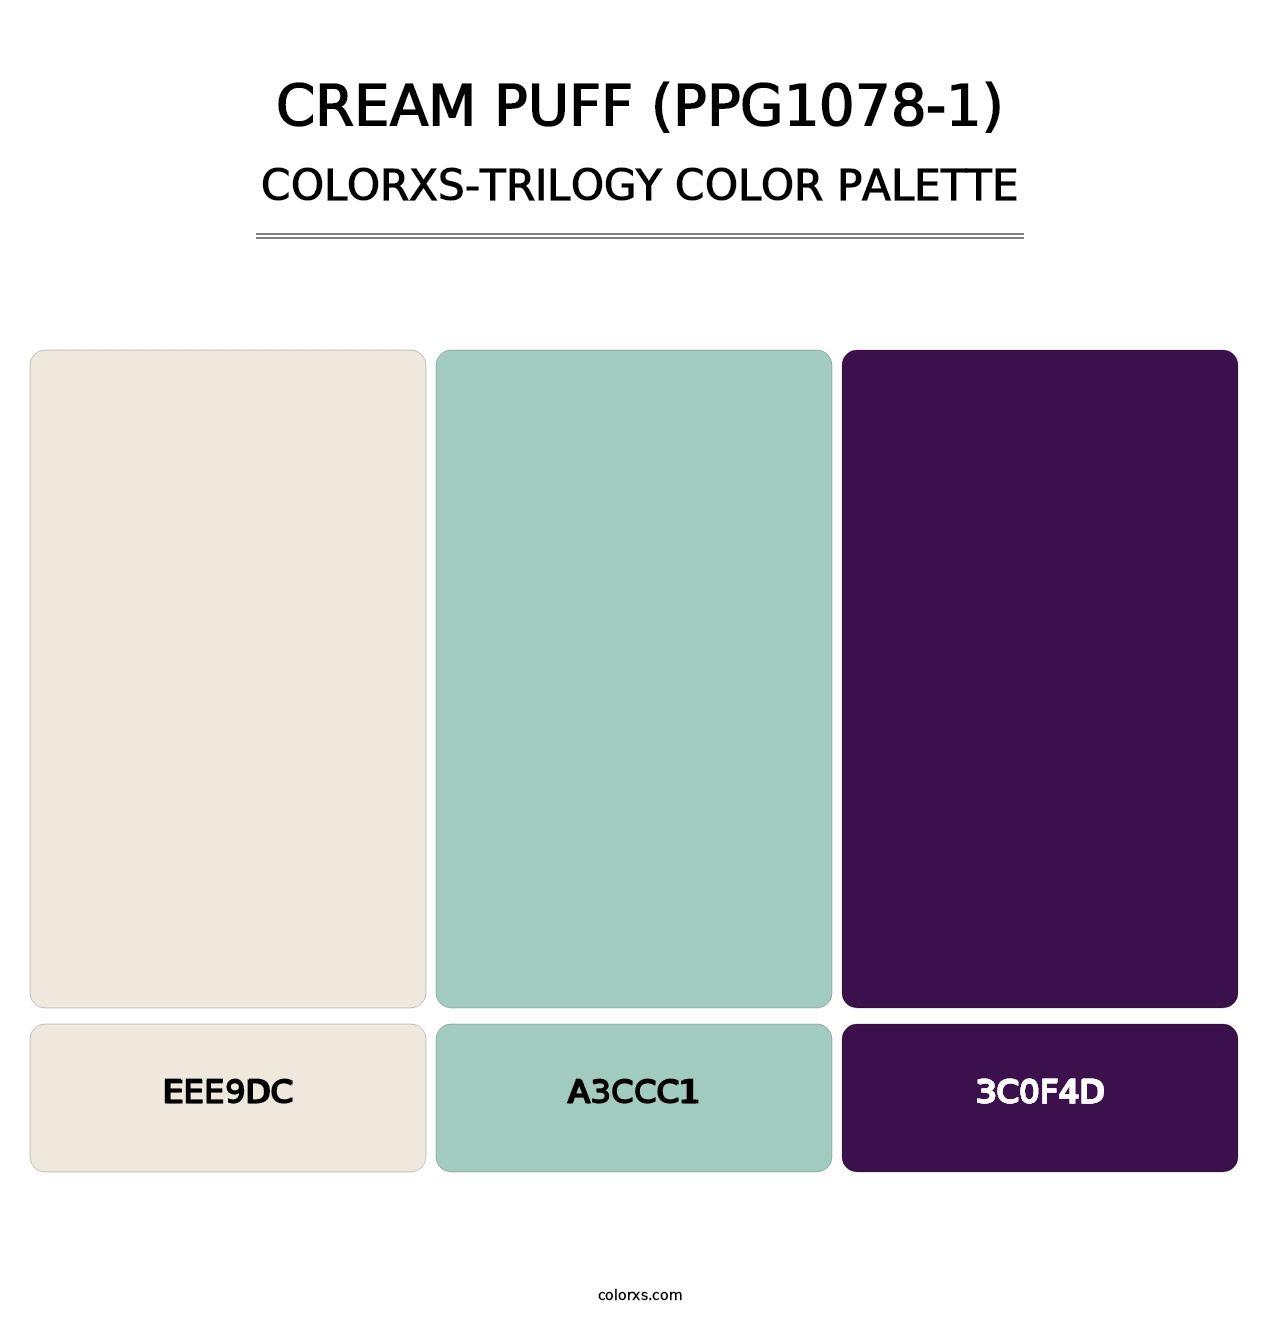 Cream Puff (PPG1078-1) - Colorxs Trilogy Palette